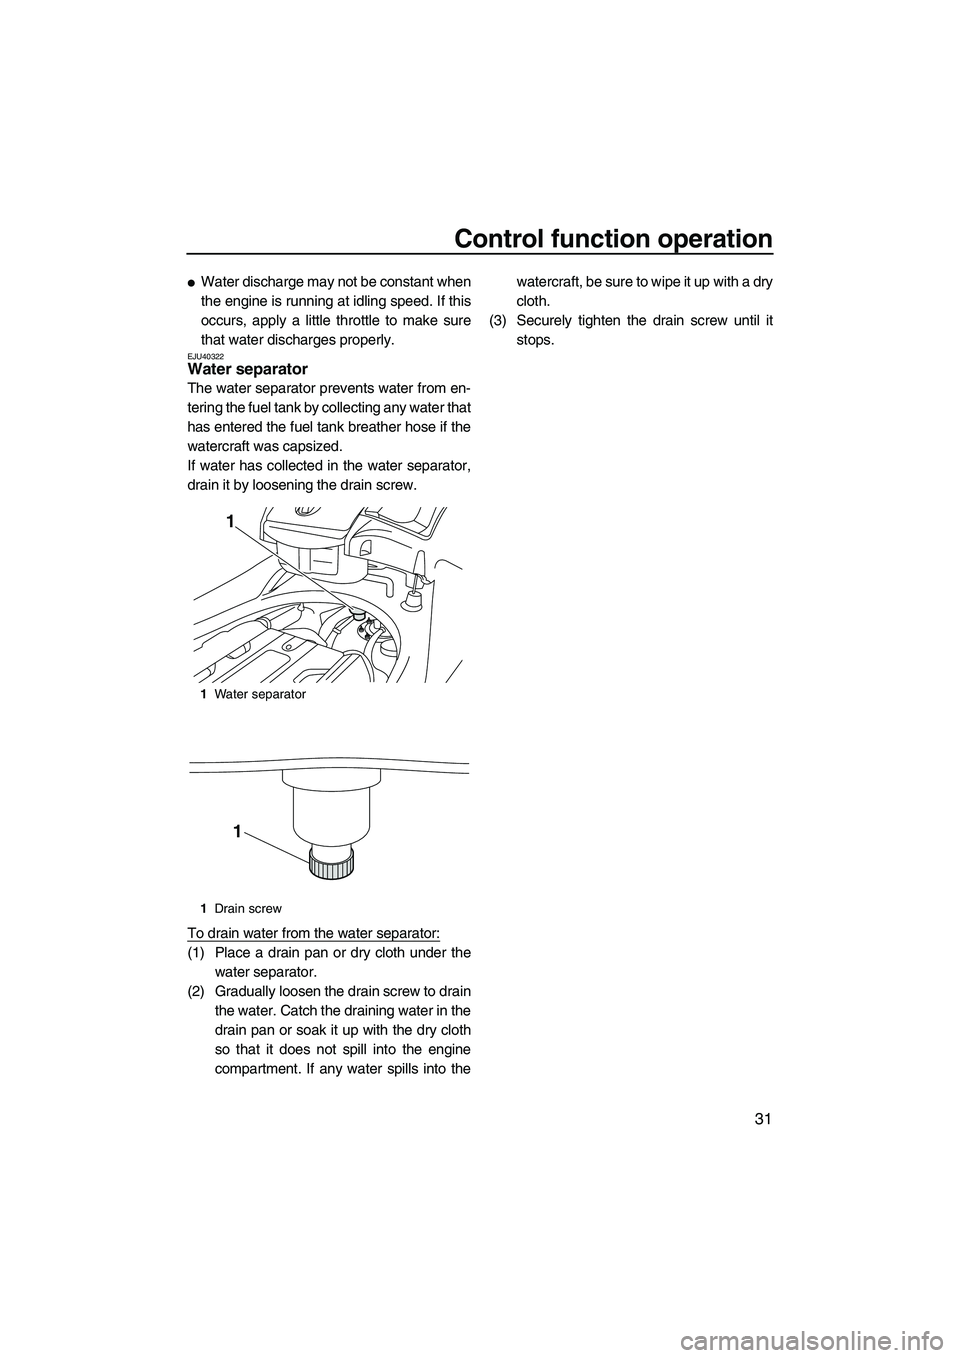 YAMAHA SVHO 2011 Owners Guide Control function operation
31
Water discharge may not be constant when
the engine is running at idling speed. If this
occurs, apply a little throttle to make sure
that water discharges properly.
EJU4